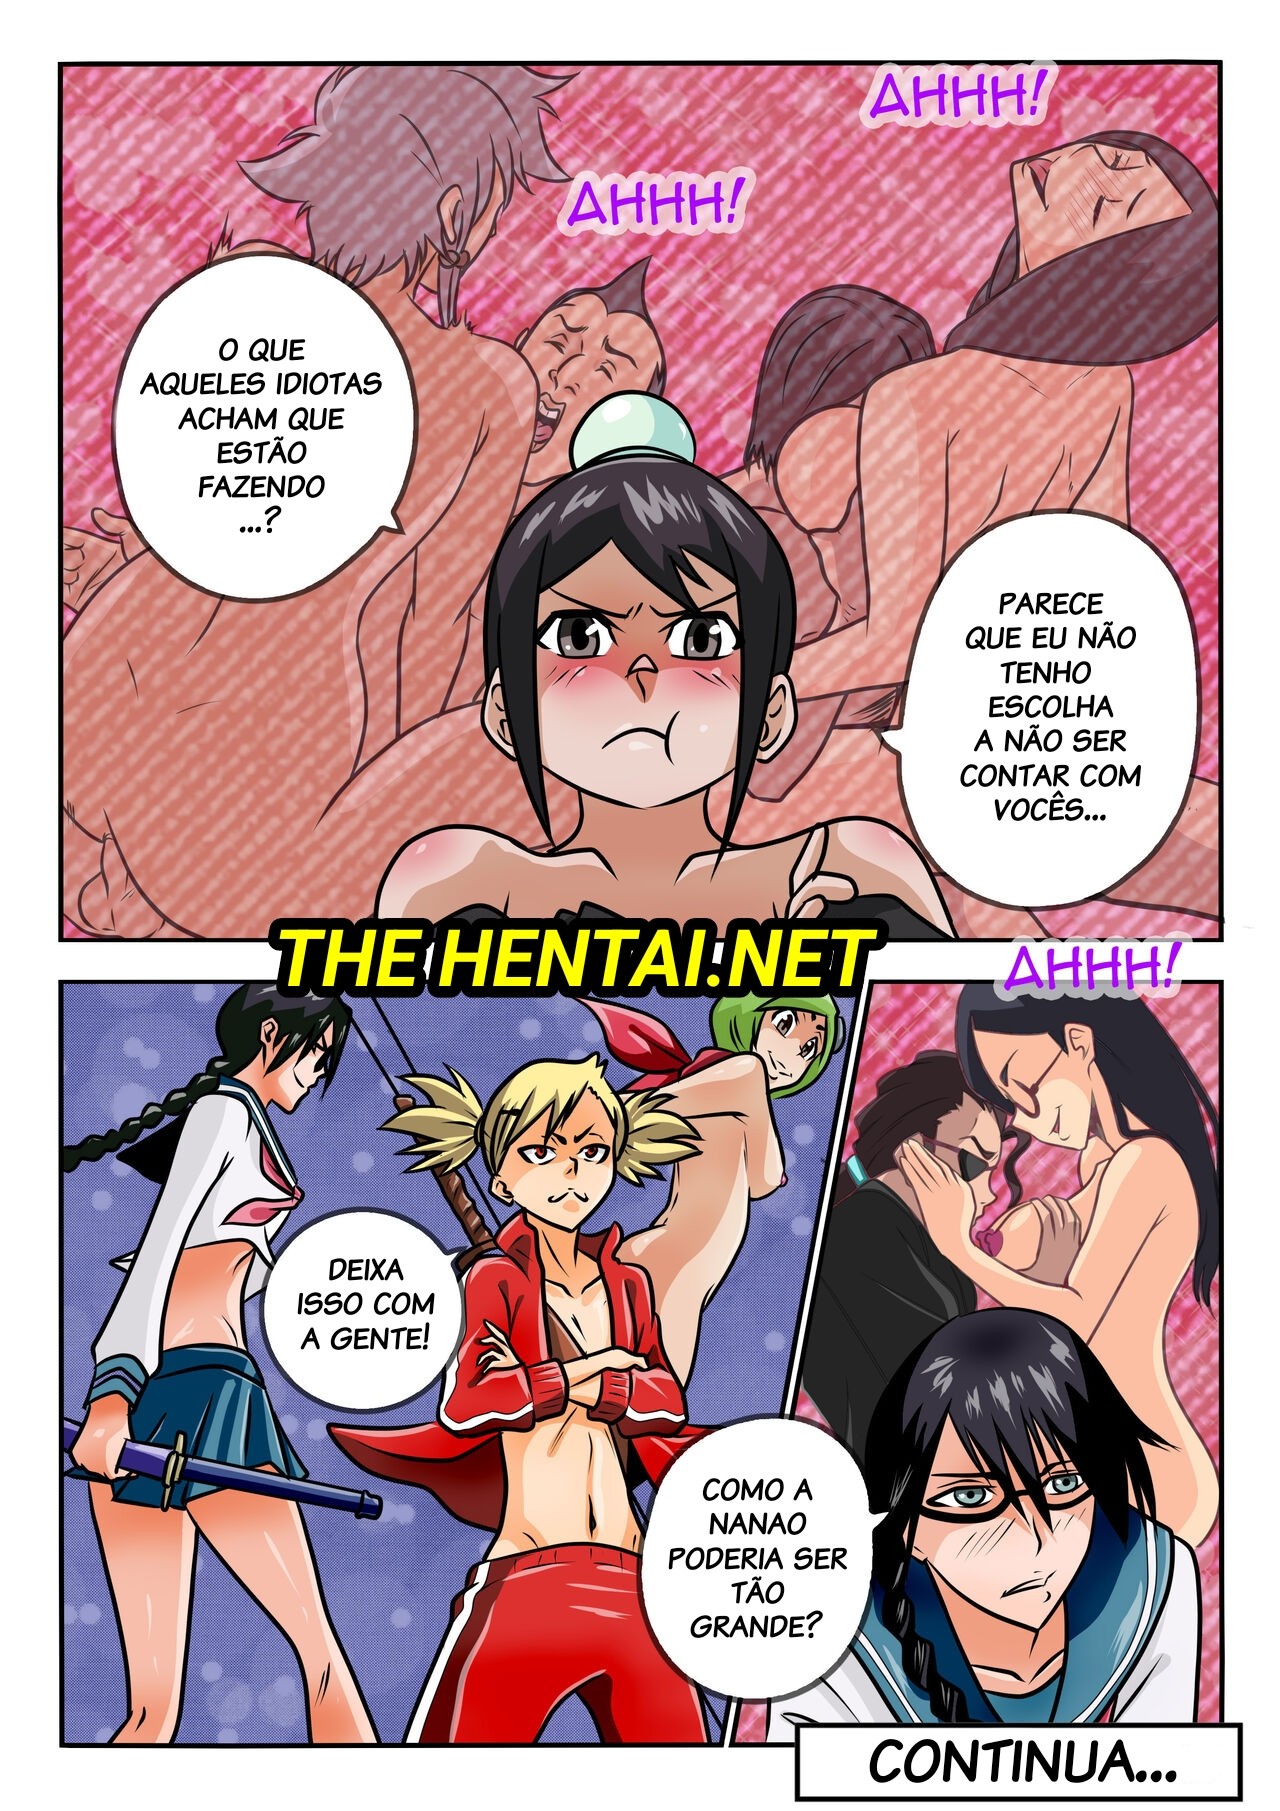 Bleach: A What If Story Part 6 Hentai pt-br 90